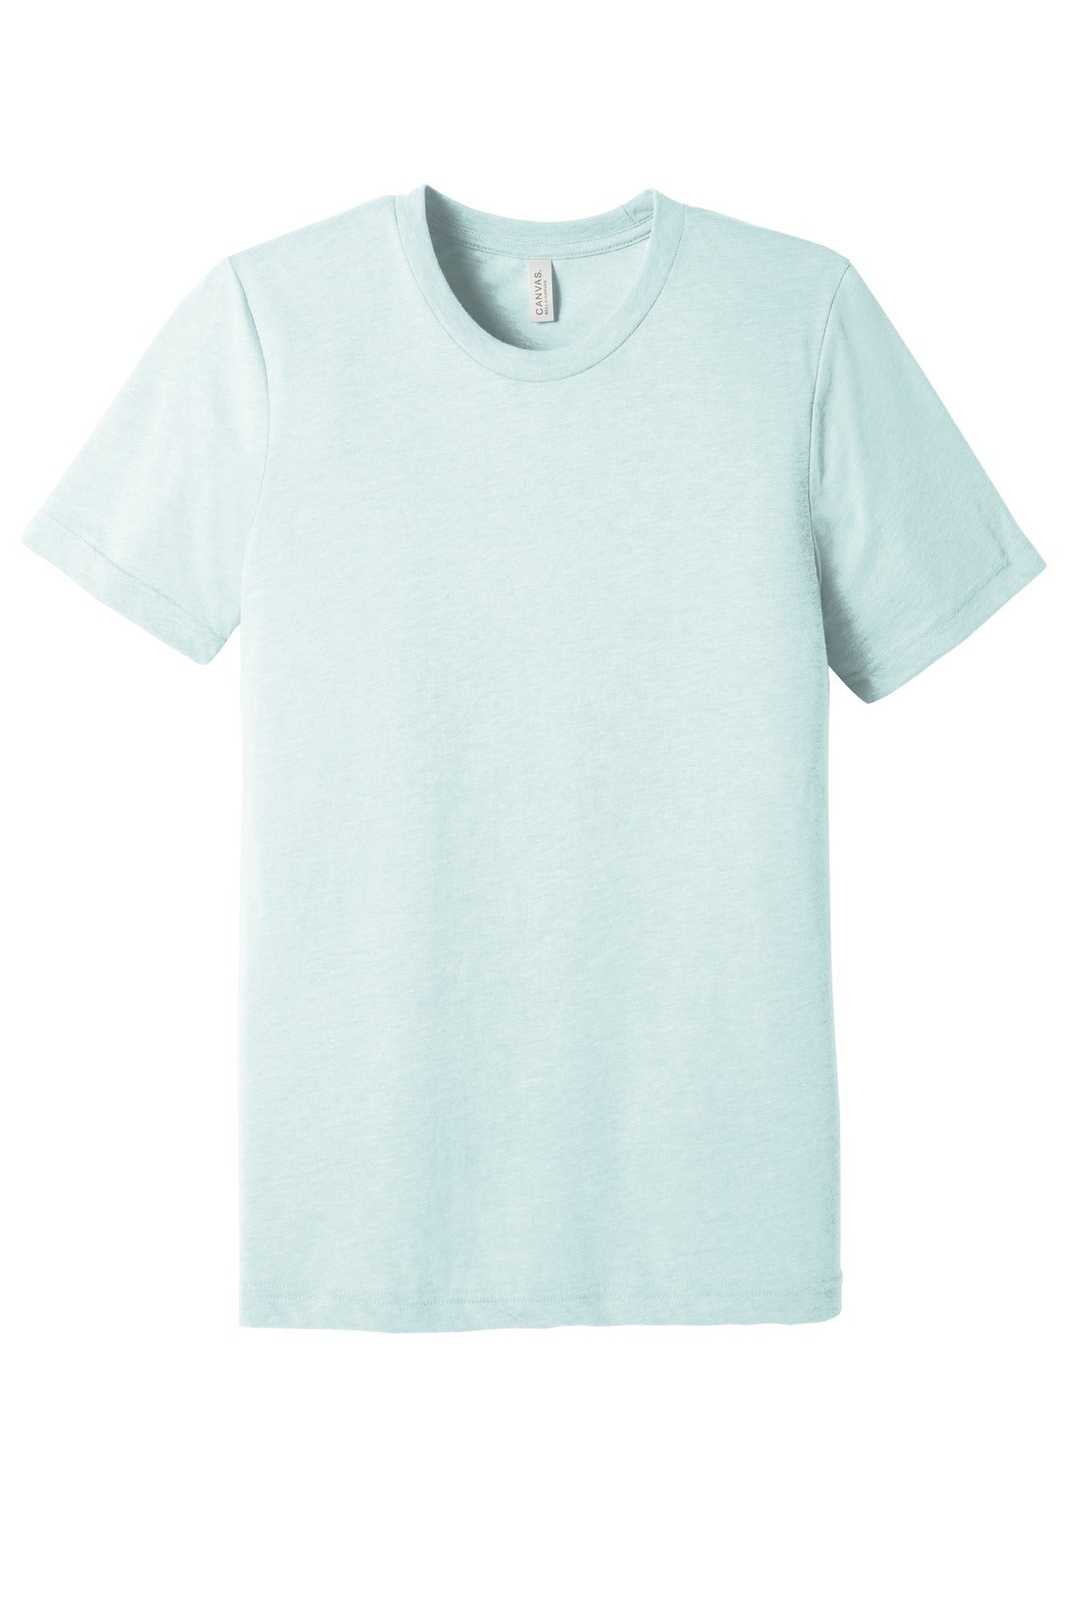 Bella + Canvas 3413 Unisex Triblend Short Sleeve Tee - Ice Blue Trible | Sport-T-Shirts